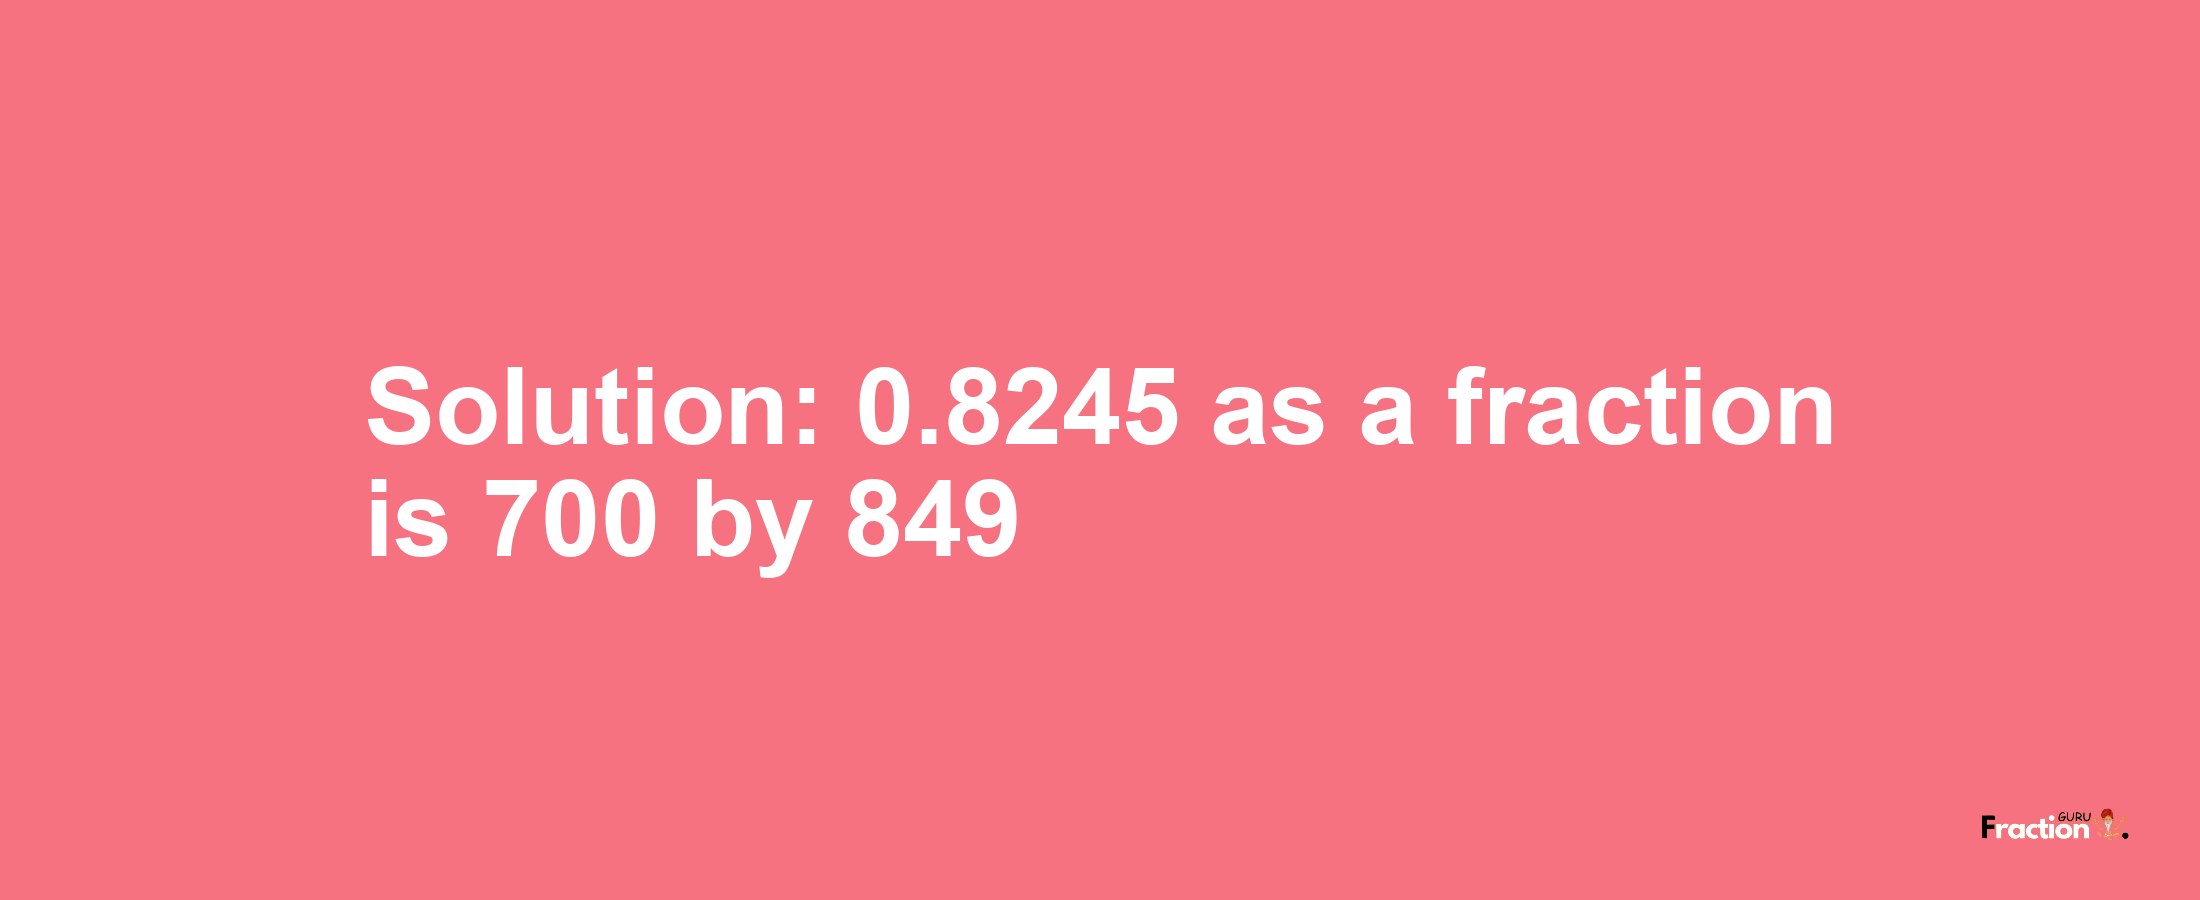 Solution:0.8245 as a fraction is 700/849